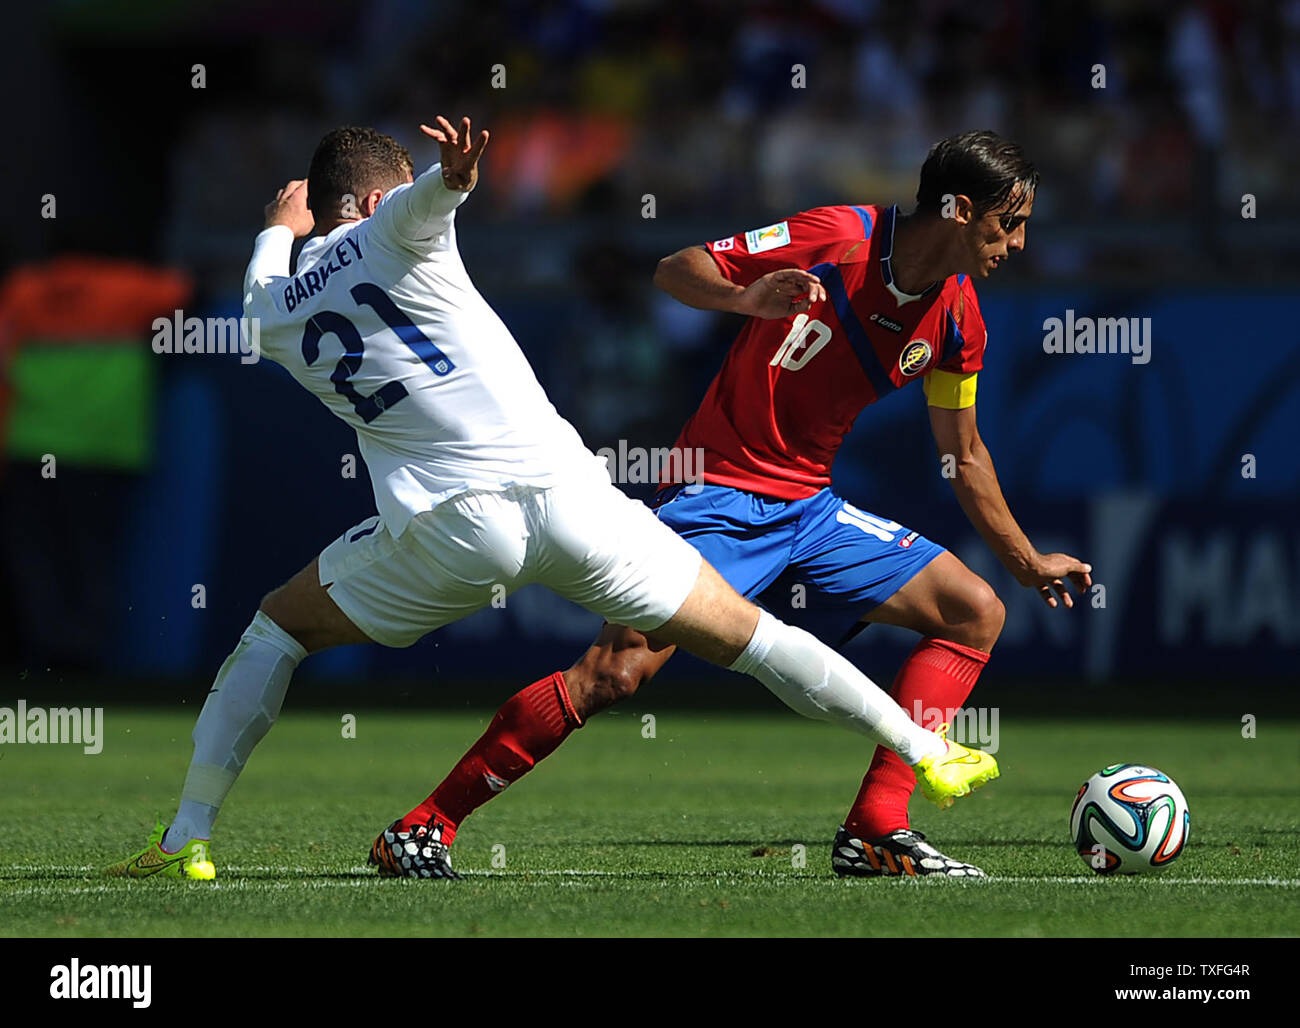 Bryan Ruiz of Costa Rica evades Ross Barkley (L) of England during the 2014 FIFA World Cup Group D match at the Estadio Mineirao in Belo Horizonte, Brazil on June 24, 2014. UPI/Chris Brunskill Stock Photo